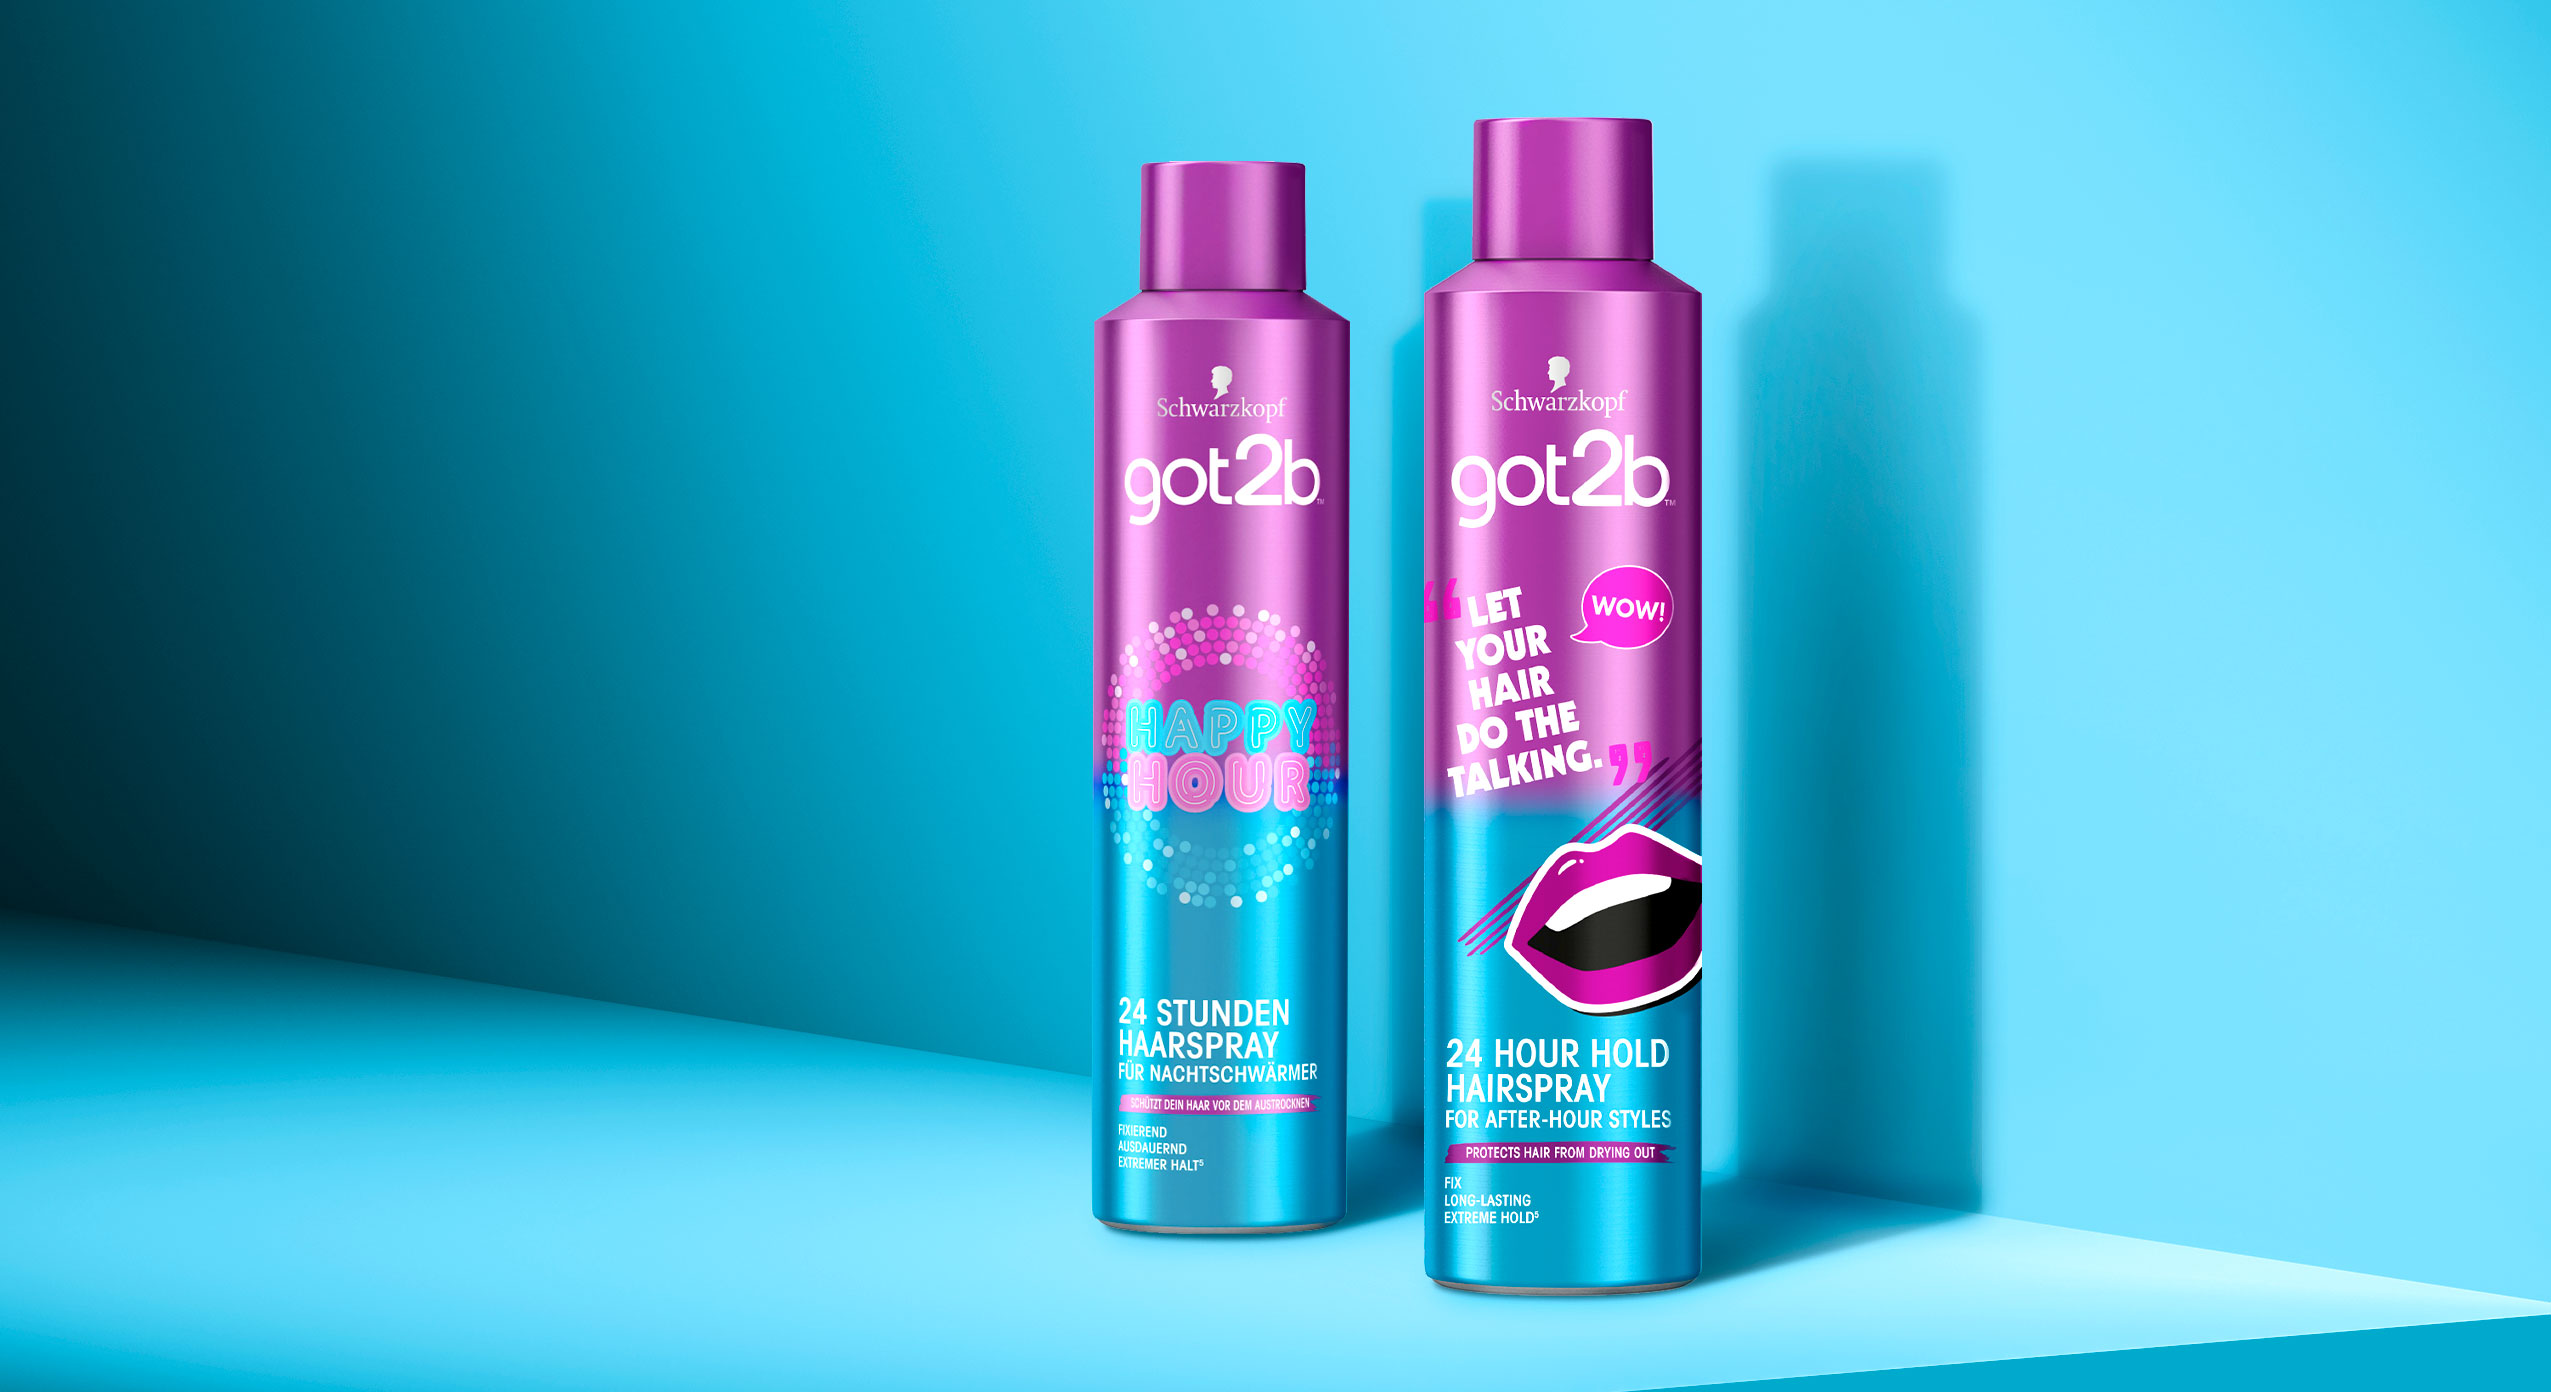 Schwarzkopf Got2b, Happy Hour Hairspray (left) and Happy Hour Hairspray limited Edition 2021 (right, developed with baries design)